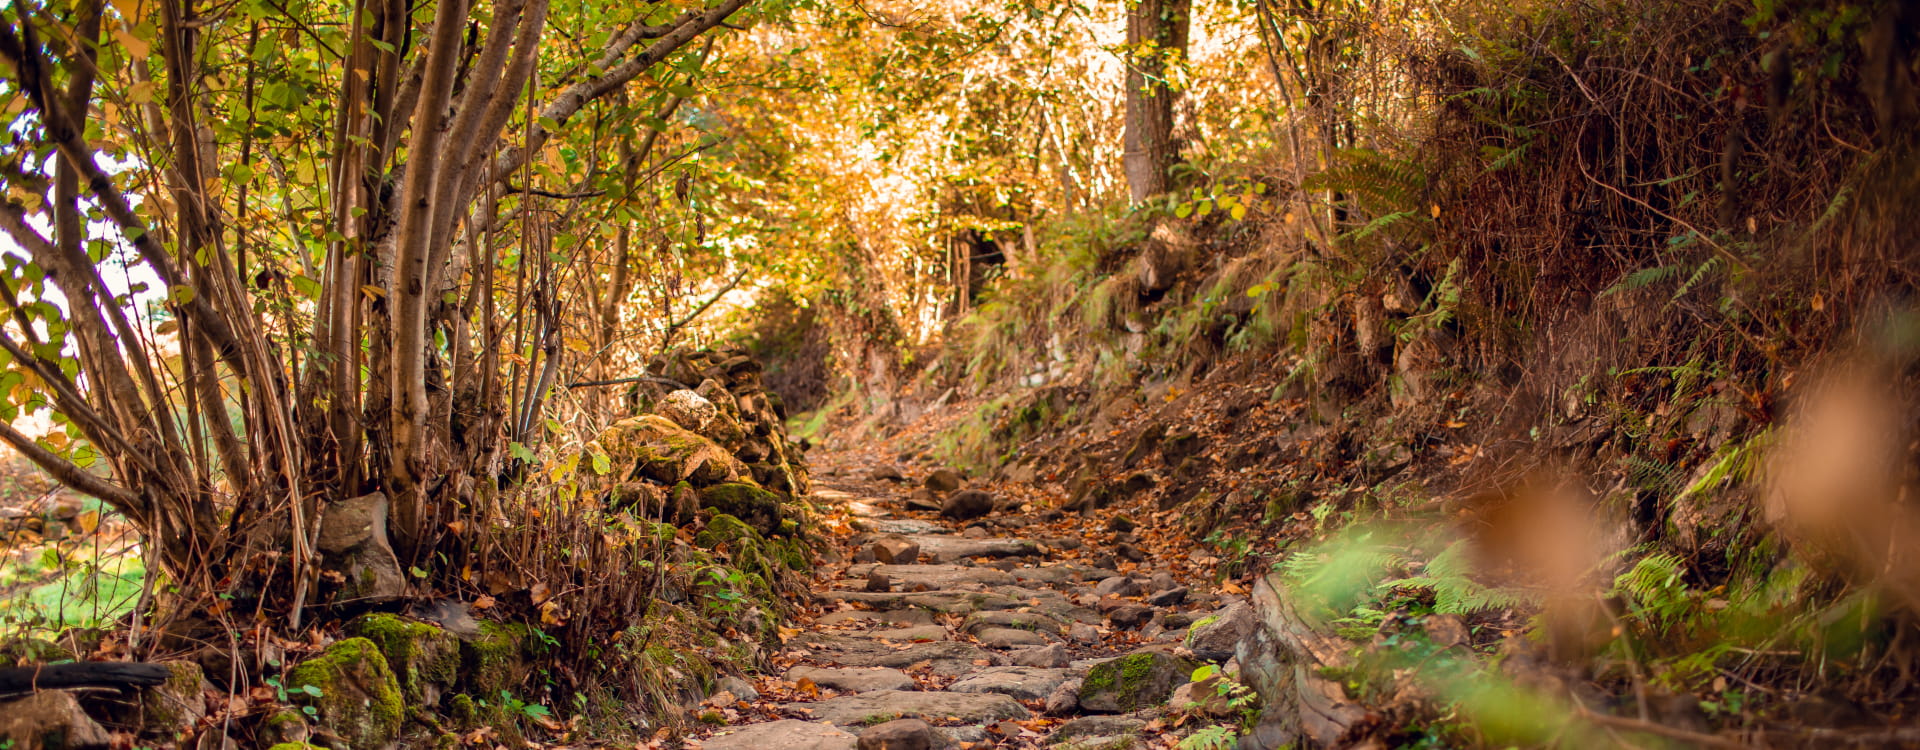 Stone path in a forest with brown leaves